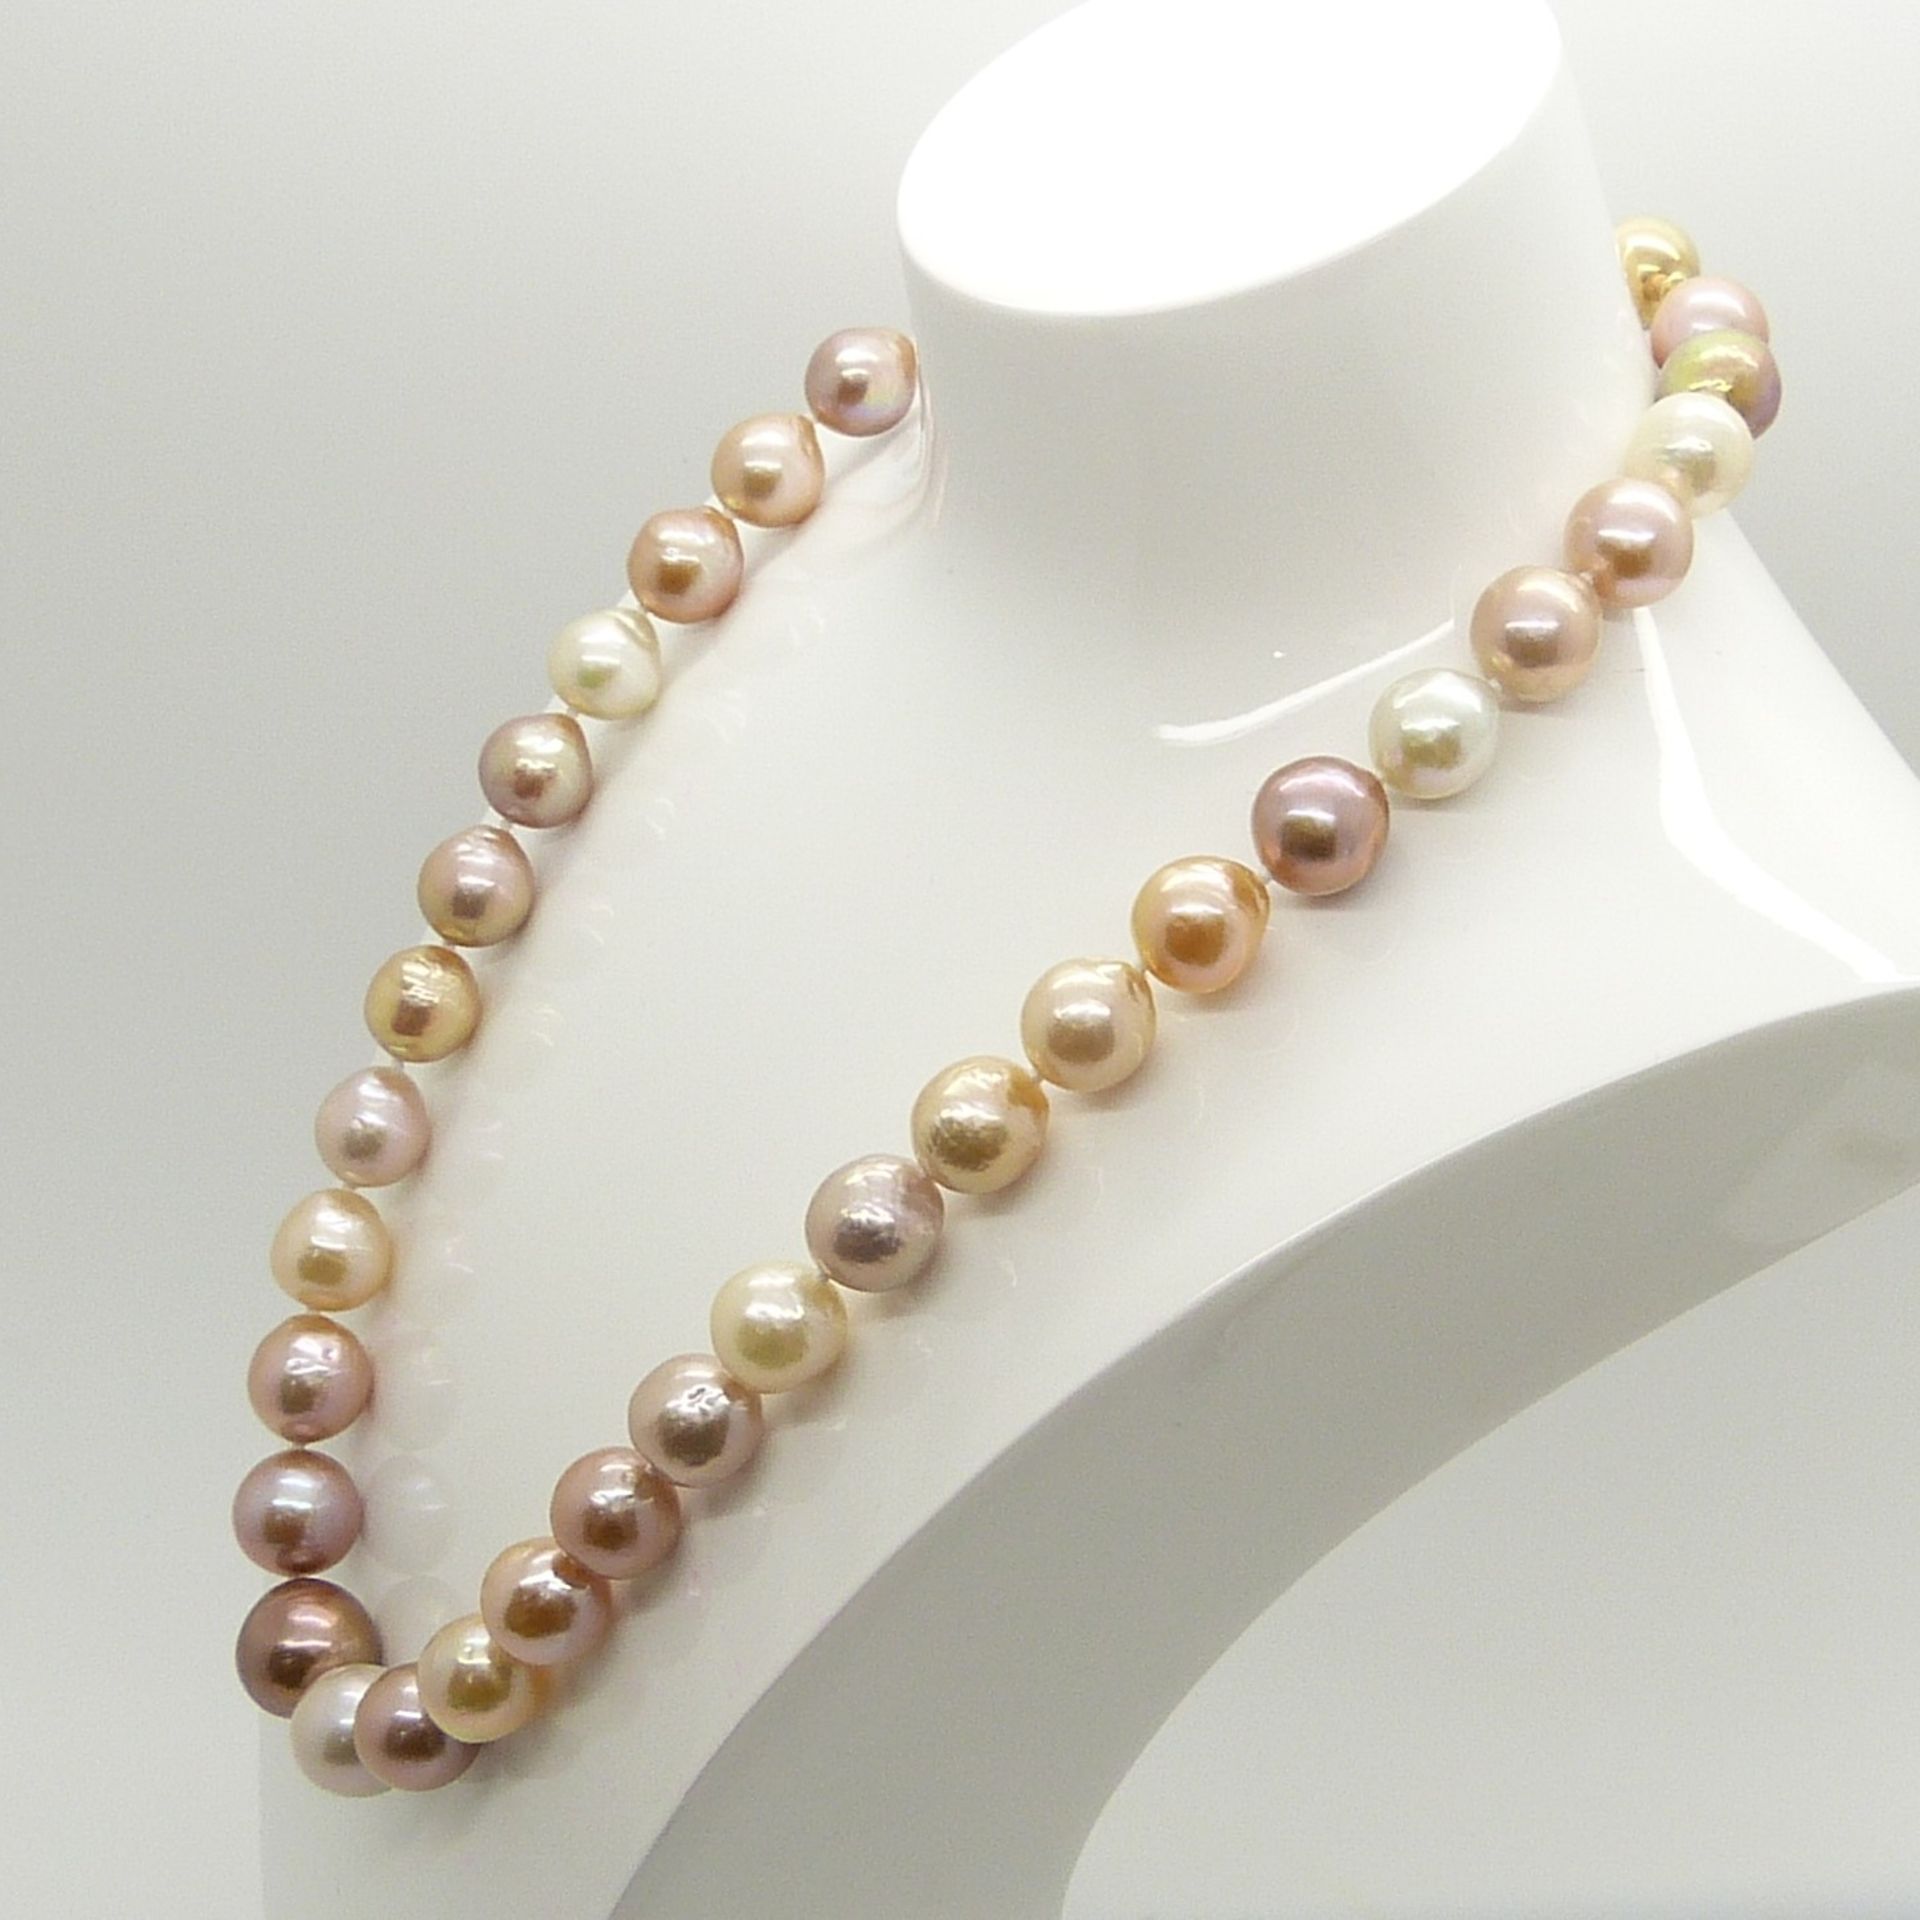 A necklace strung with peach, white, champagne and grey freshwater pearls with 9ct yellow gold clasp